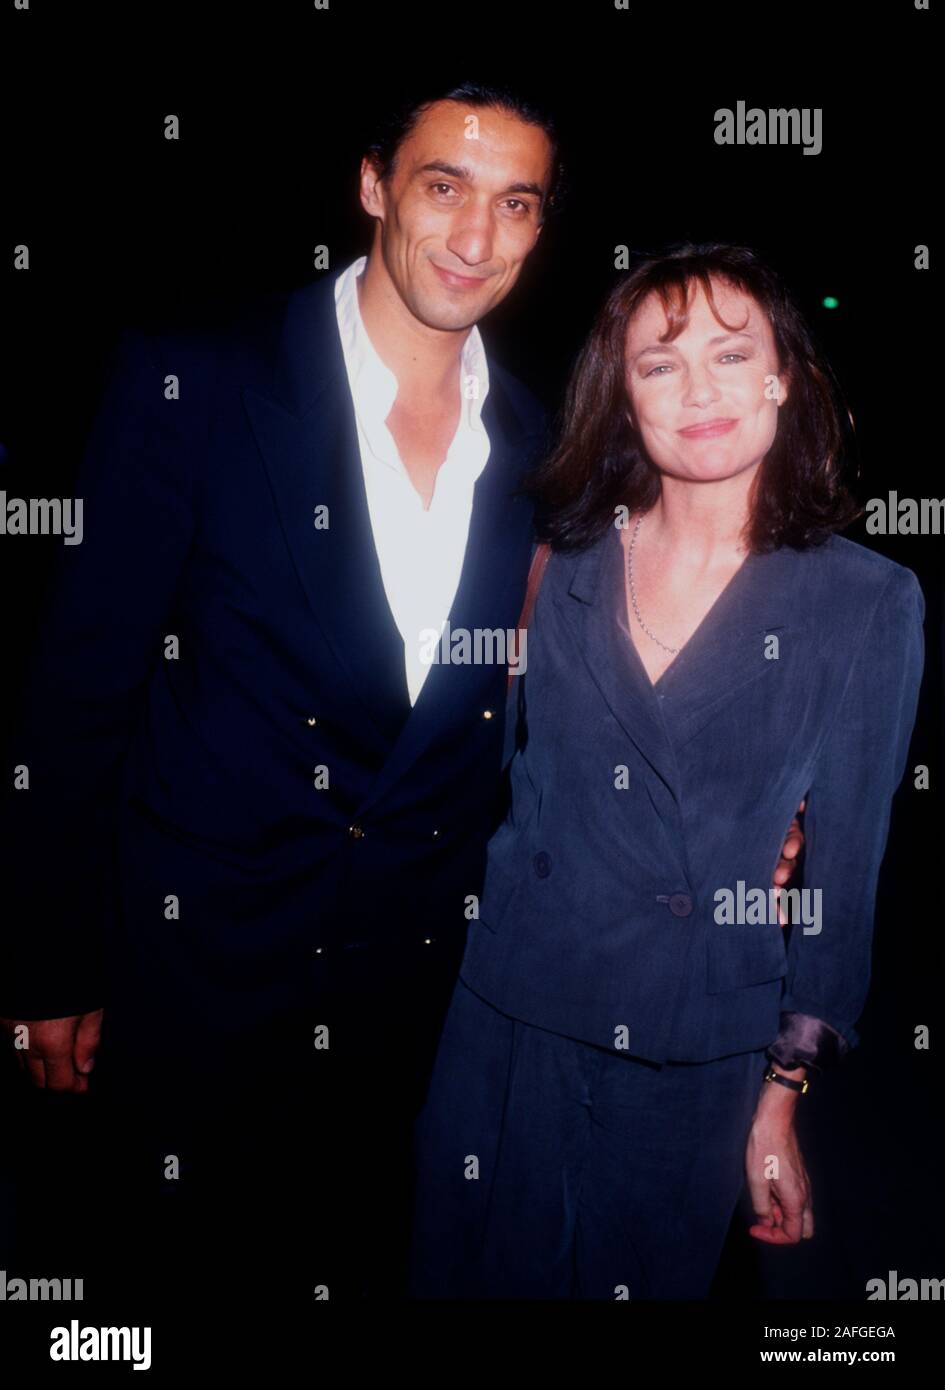 Beverly Hills, California, USA 3rd April 1995 Emin Boztepe and actress Jacqueline  Bisset attend New Line Cinema's 'Don Juan DeMarco' Premiere on April 3, 1995 at the Academy Theatre in Beverly Hills, California, USA. Photo by Barry King/Alamy Stock Photo Stock Photo